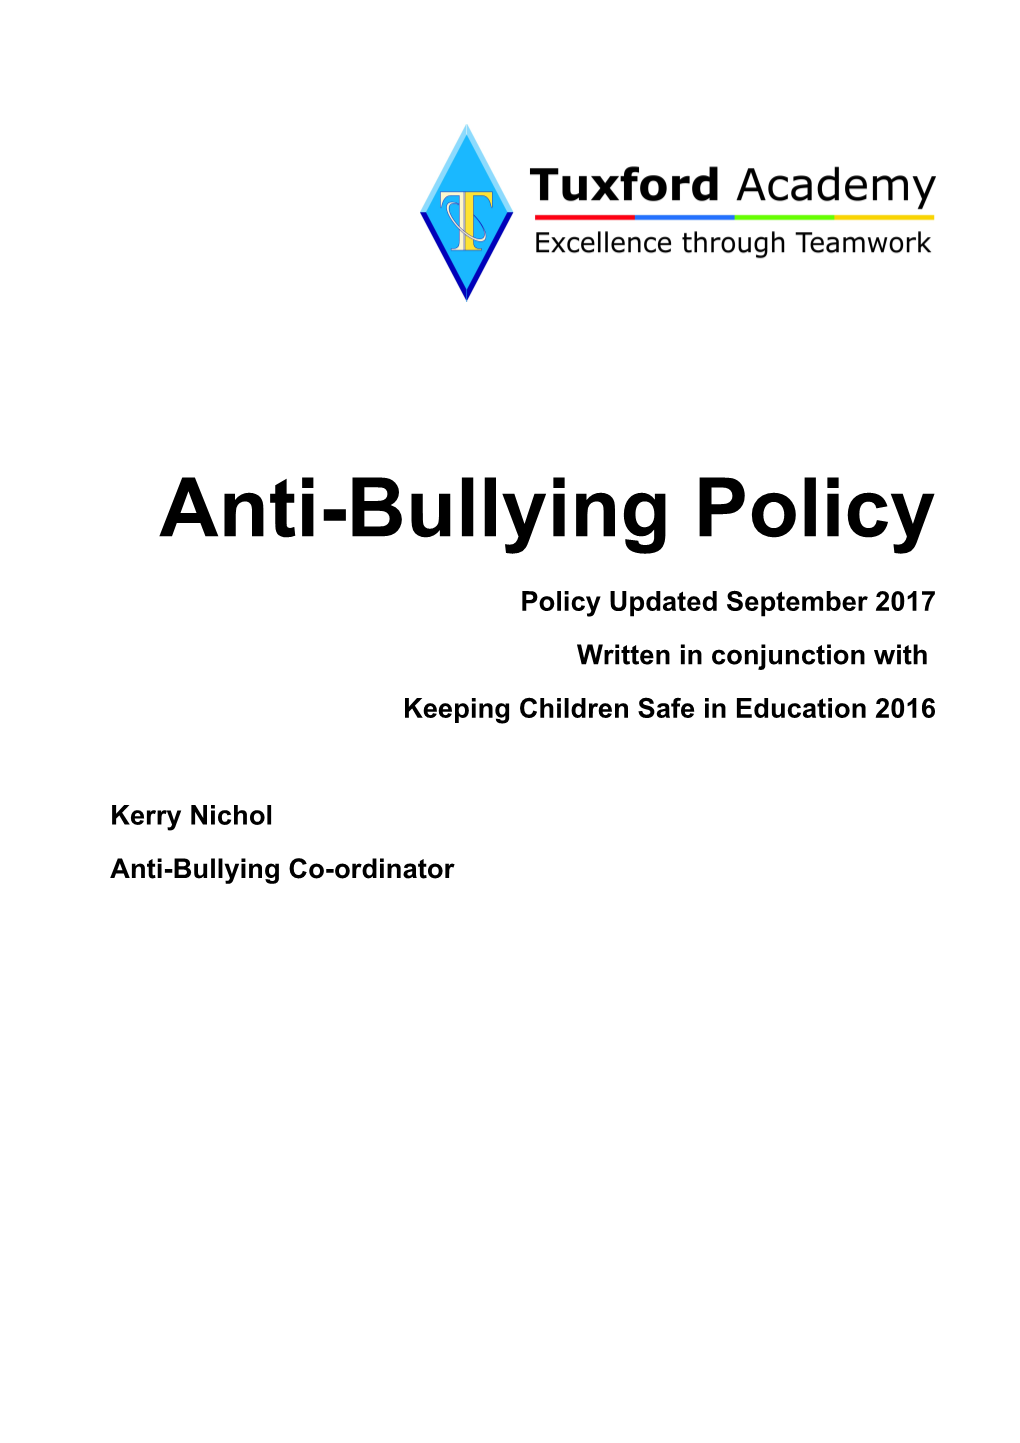 Anti-Bullying Policy s5